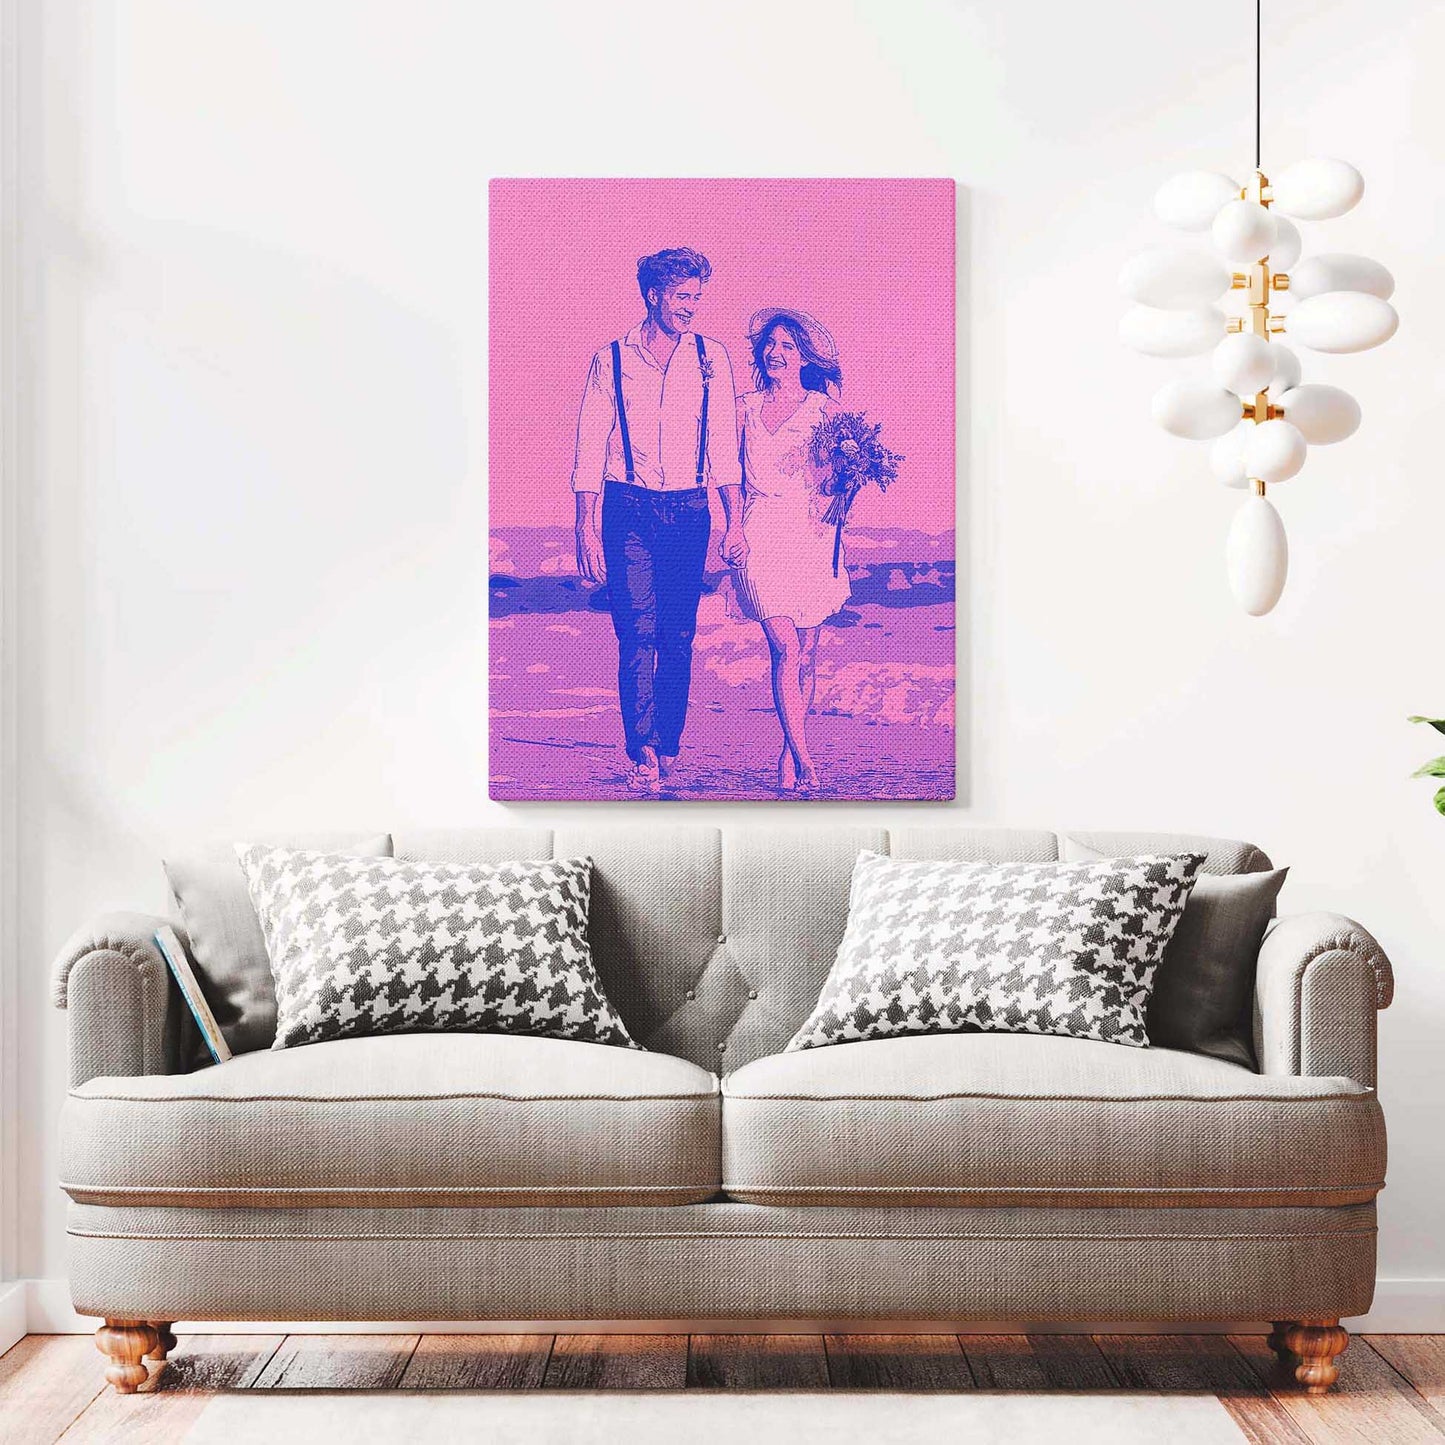 Experience the magic of personalized art with our Personalised Purple & Pink Comic Cartoon Canvas. Our skilled artists create visually stunning cartoon artworks from your photos, infusing them with a retro vibe and vibrant energy